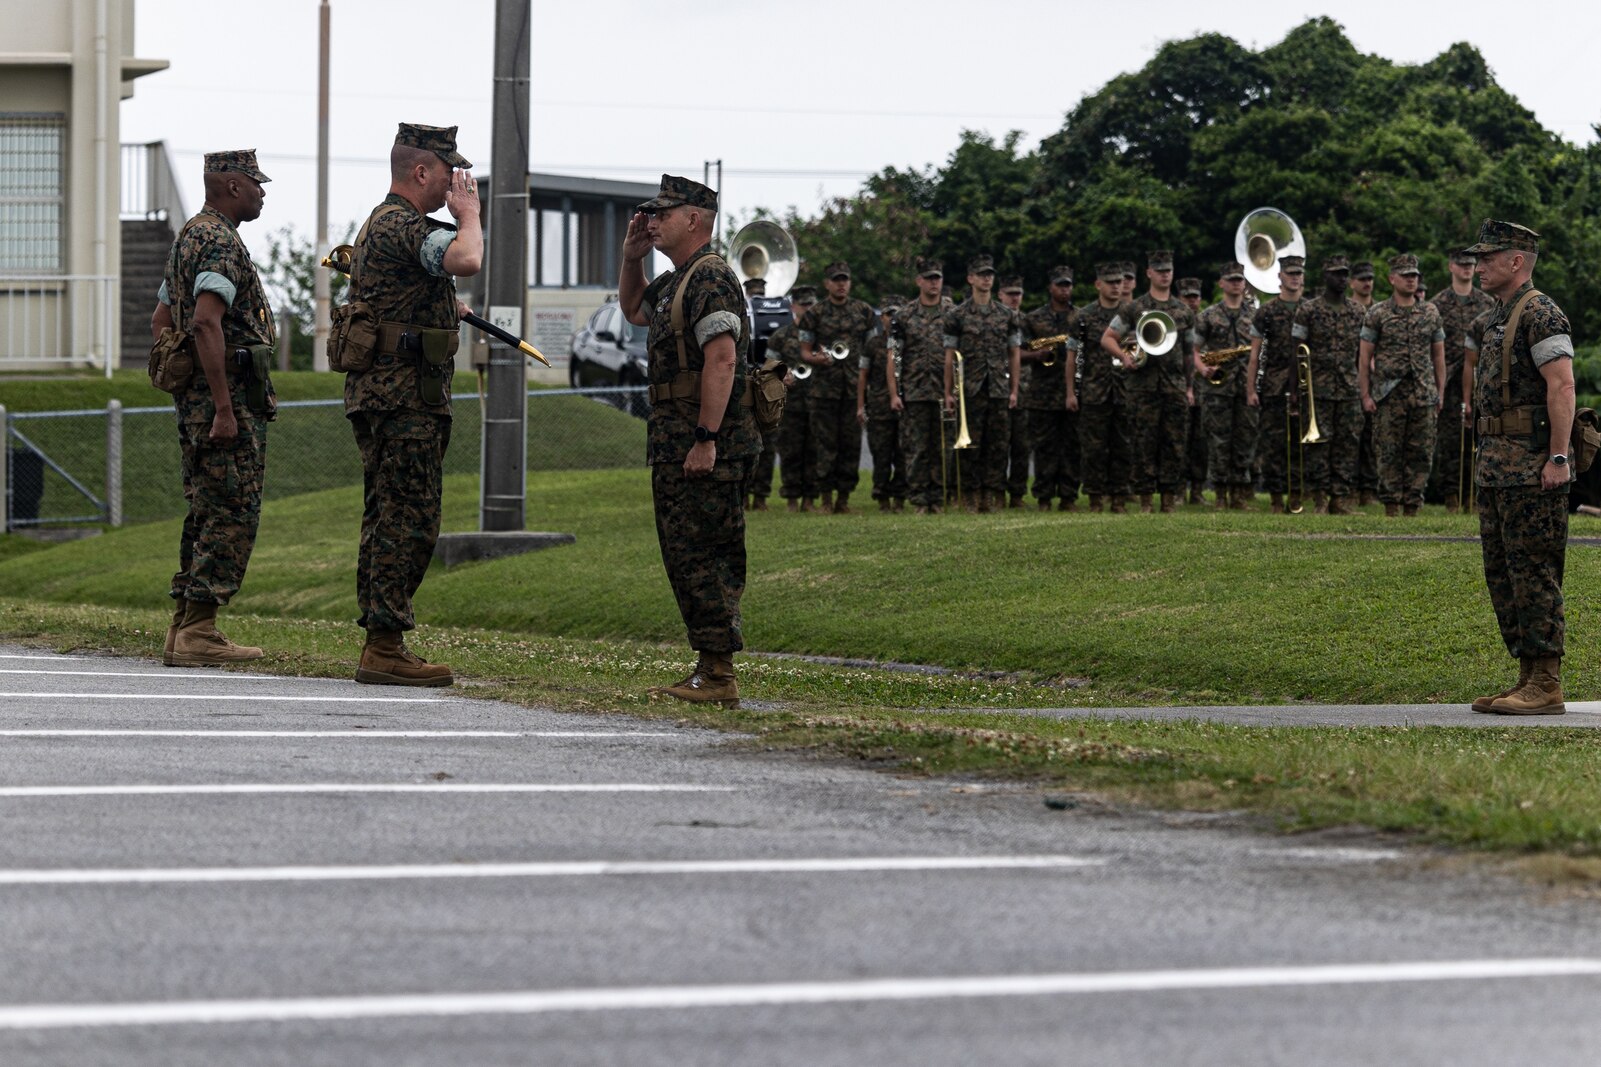 U.S. Navy Command Master Chief Donald O. Leppert, a native of Binghamton, New York salutes U.S. Marine Corps Lt. Gen. James W. Bierman, born in Camp Lejeune, as part of the III Marine Expeditionary Force change of office ceremony on Camp Courtney, Okinawa, Japan, May 4, 2023. U.S. Navy Command Master Chief Curtis D. Blunt, the outgoing command master chief of III MEF, relinquishes his duties to Command Master Chief Donald O. Leppert. (U.S. Marine Corps photo by Cpl. Colton Nicks)